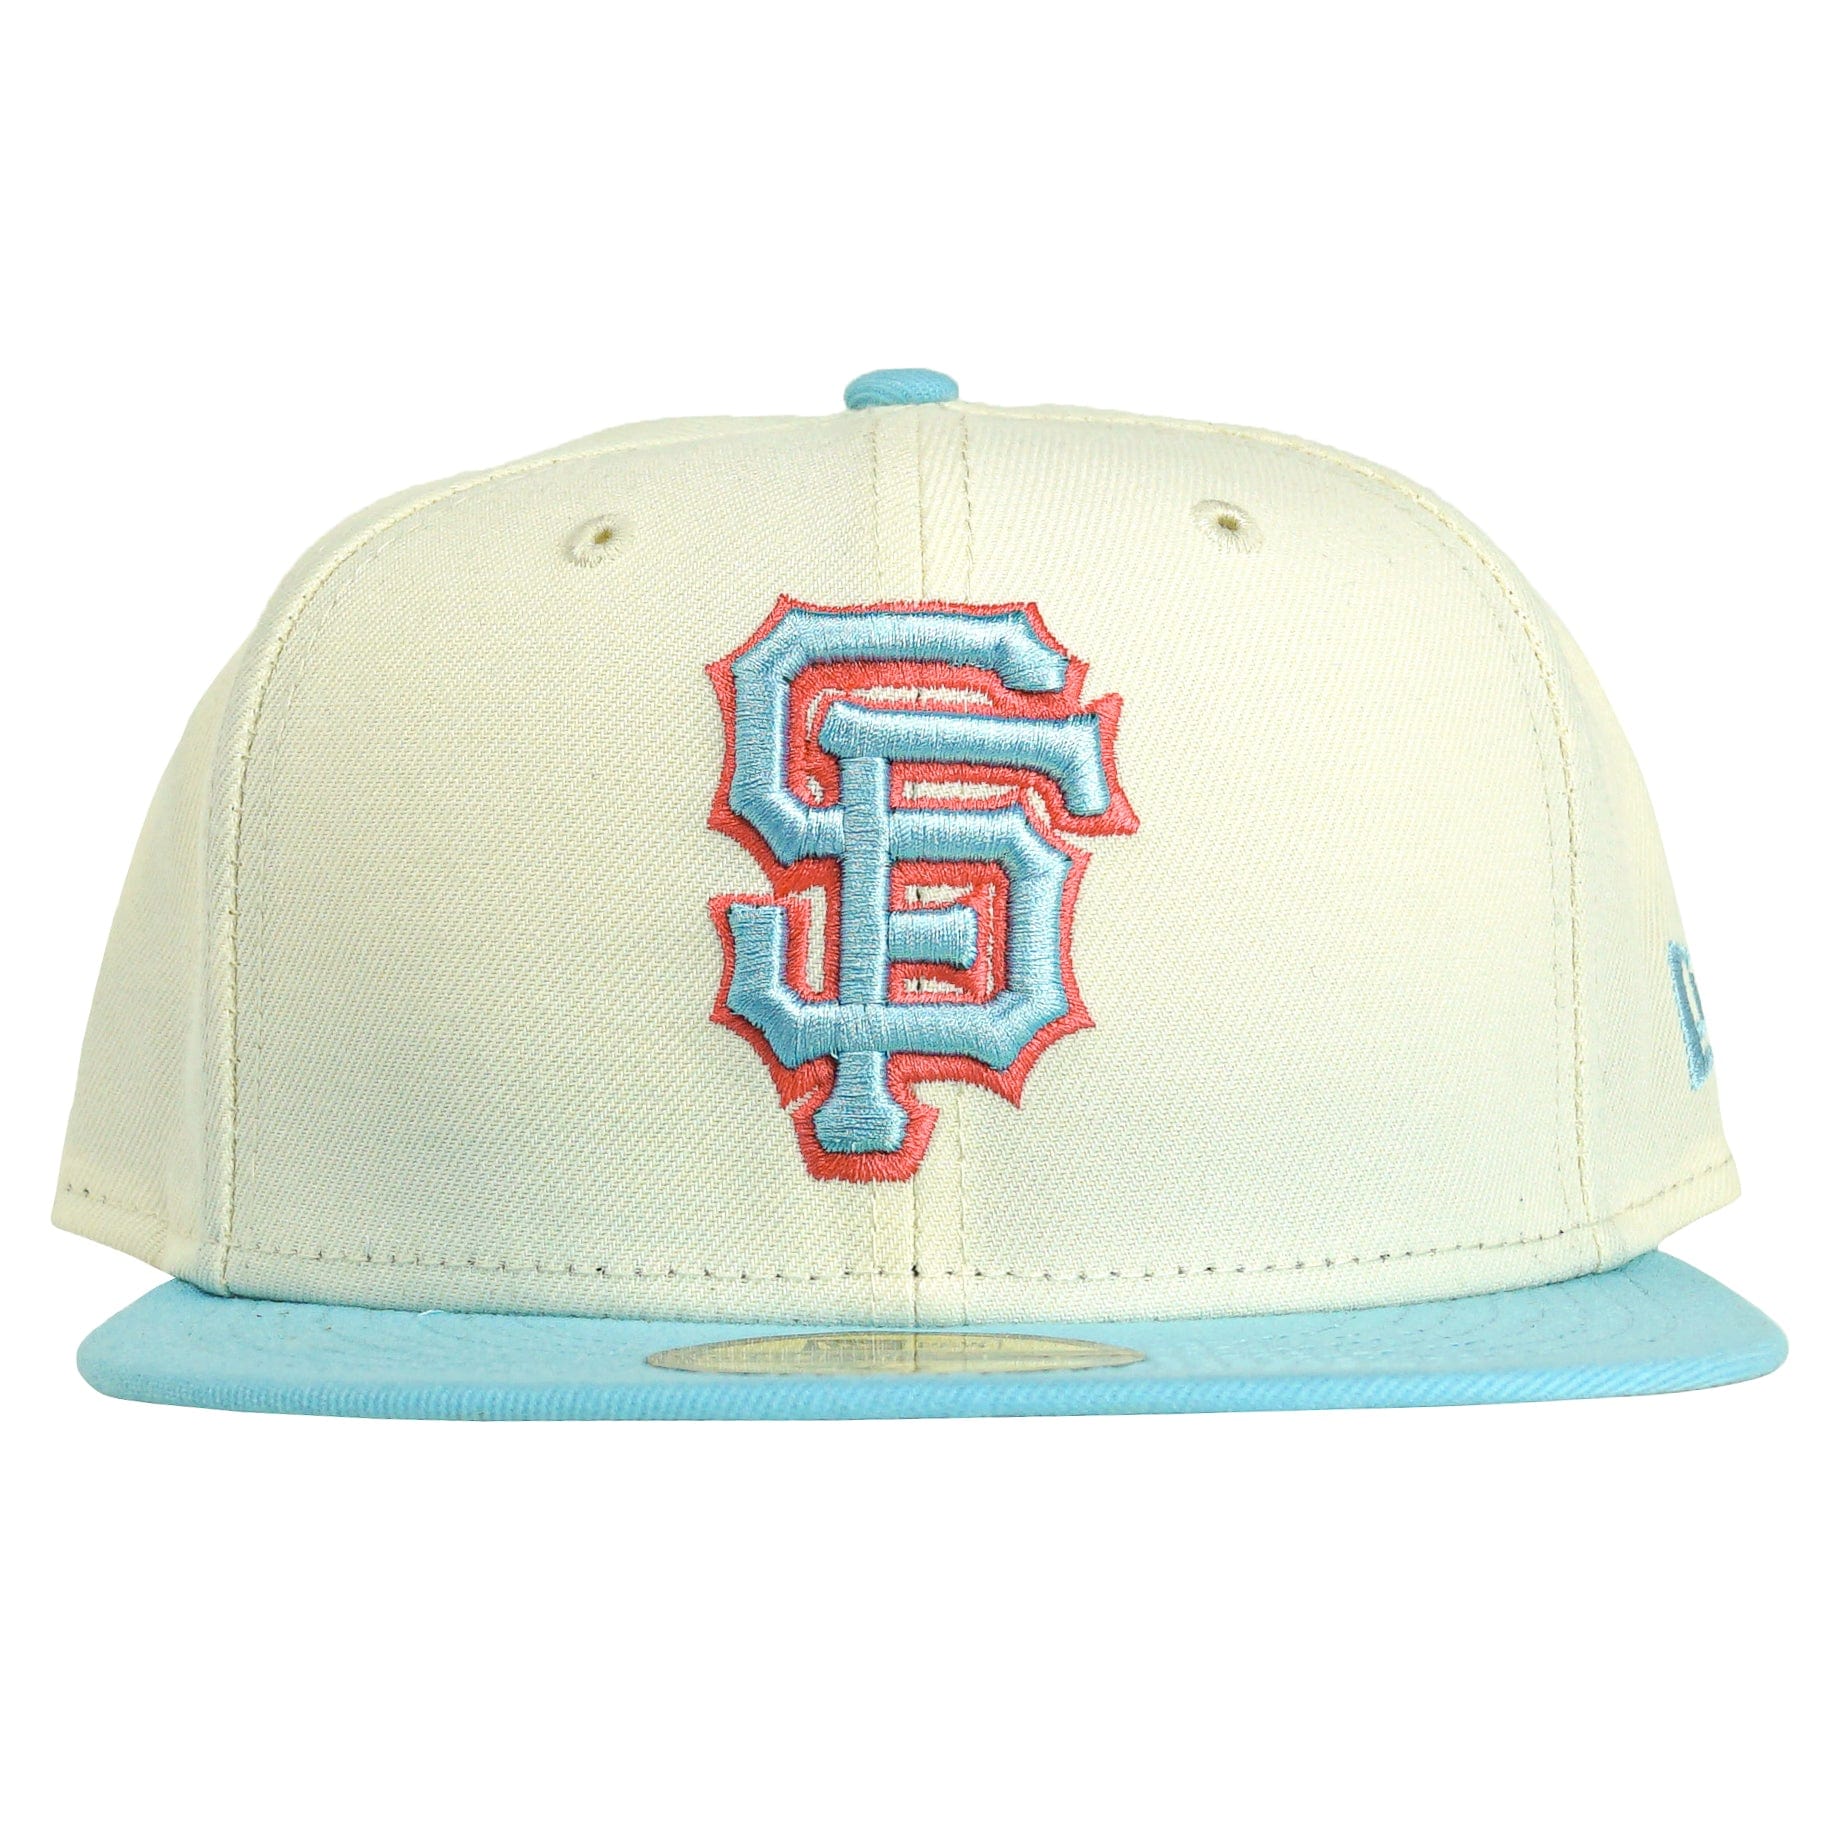 San Francisco Giants 2-Tone Colorpack 59Fifty Fitted Hat in cream and light blue